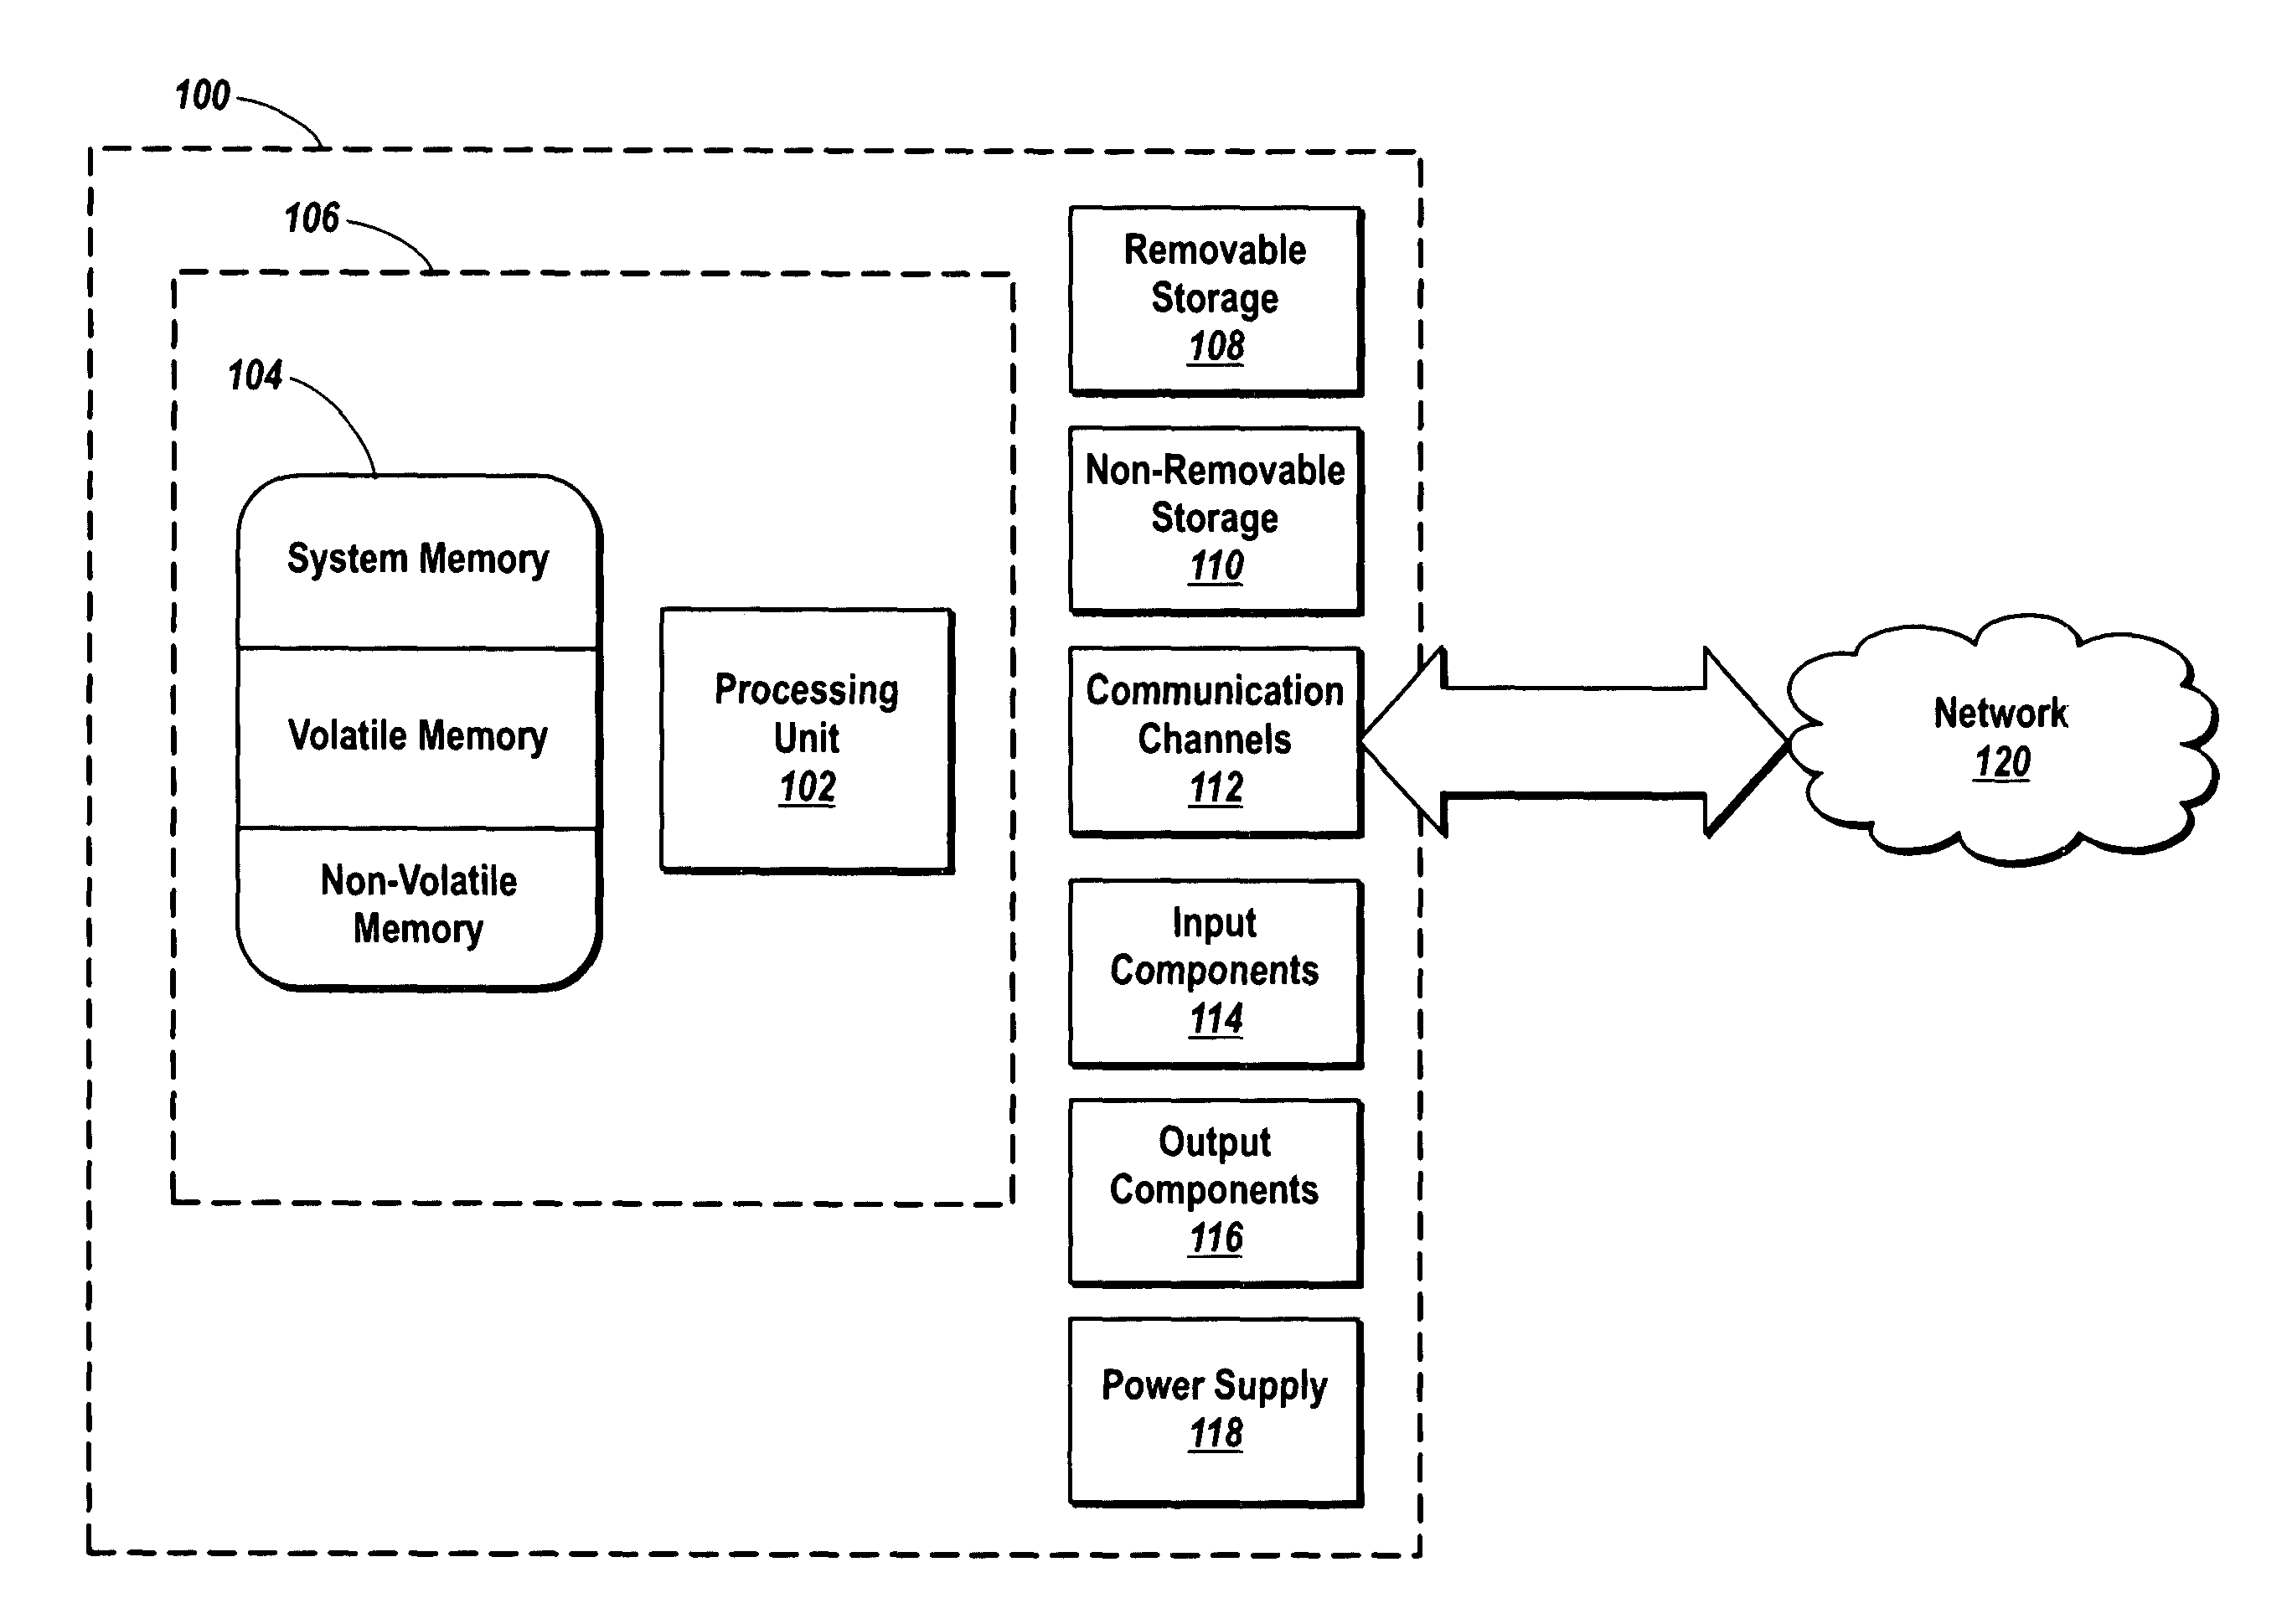 Software-aided storage device emulation in a physical storage device